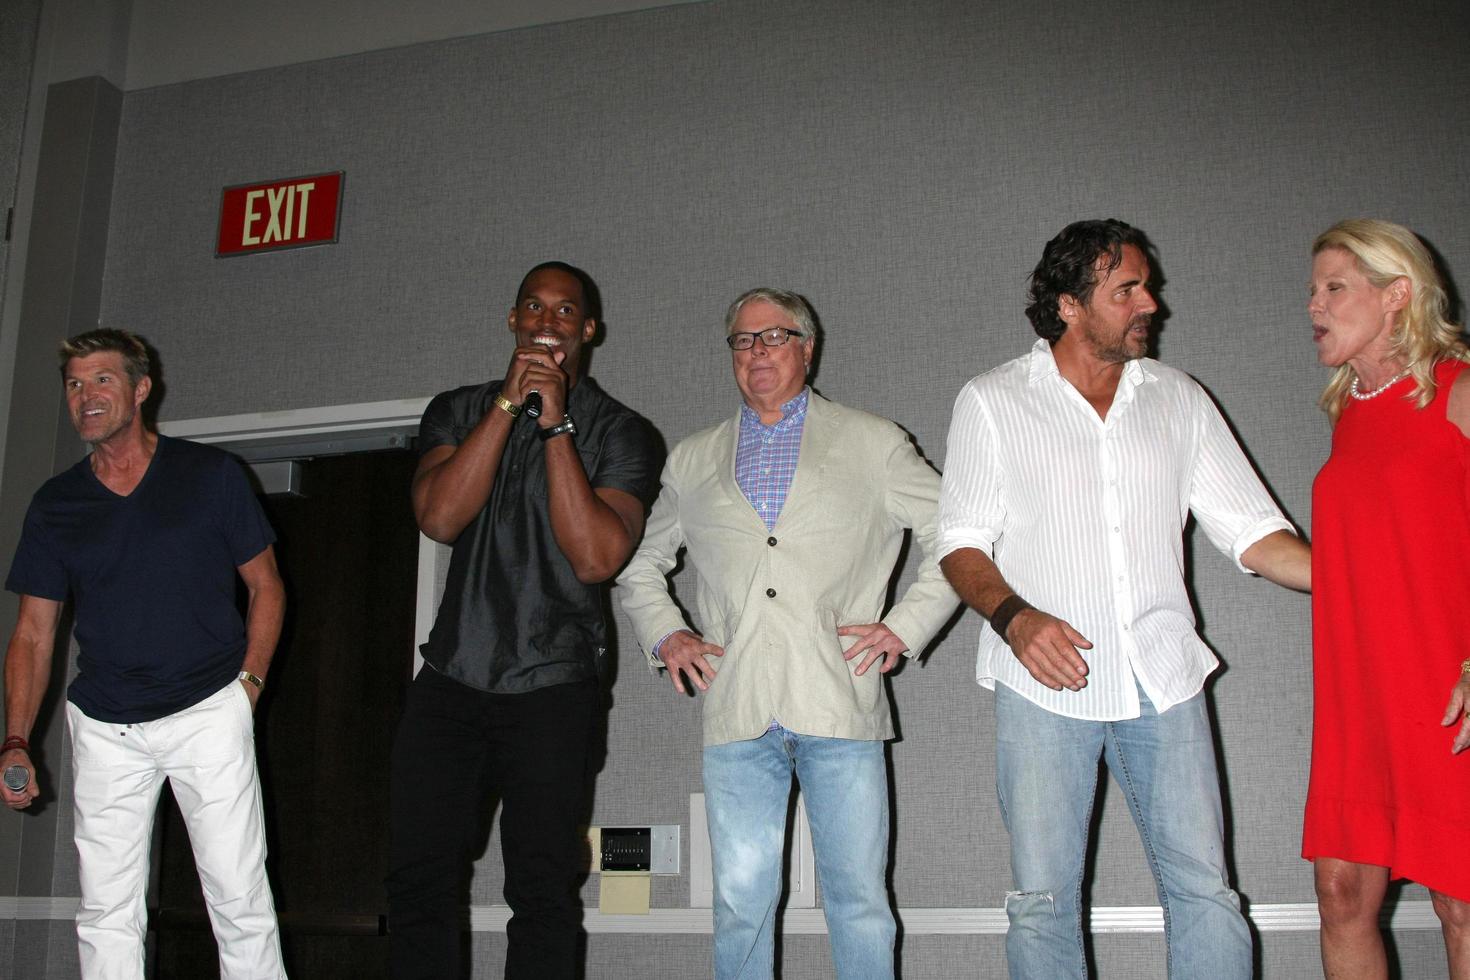 LOS ANGELES - AUG 20 - Winsor Harmon, Lawrence Saint-Victor, Dick Christie, Thorston Kaye, Alley Mills at the Bold and the Beautiful Fan Event 2017 at the Marriott Burbank Convention Center on August 20, 2017 in Burbank, CA photo